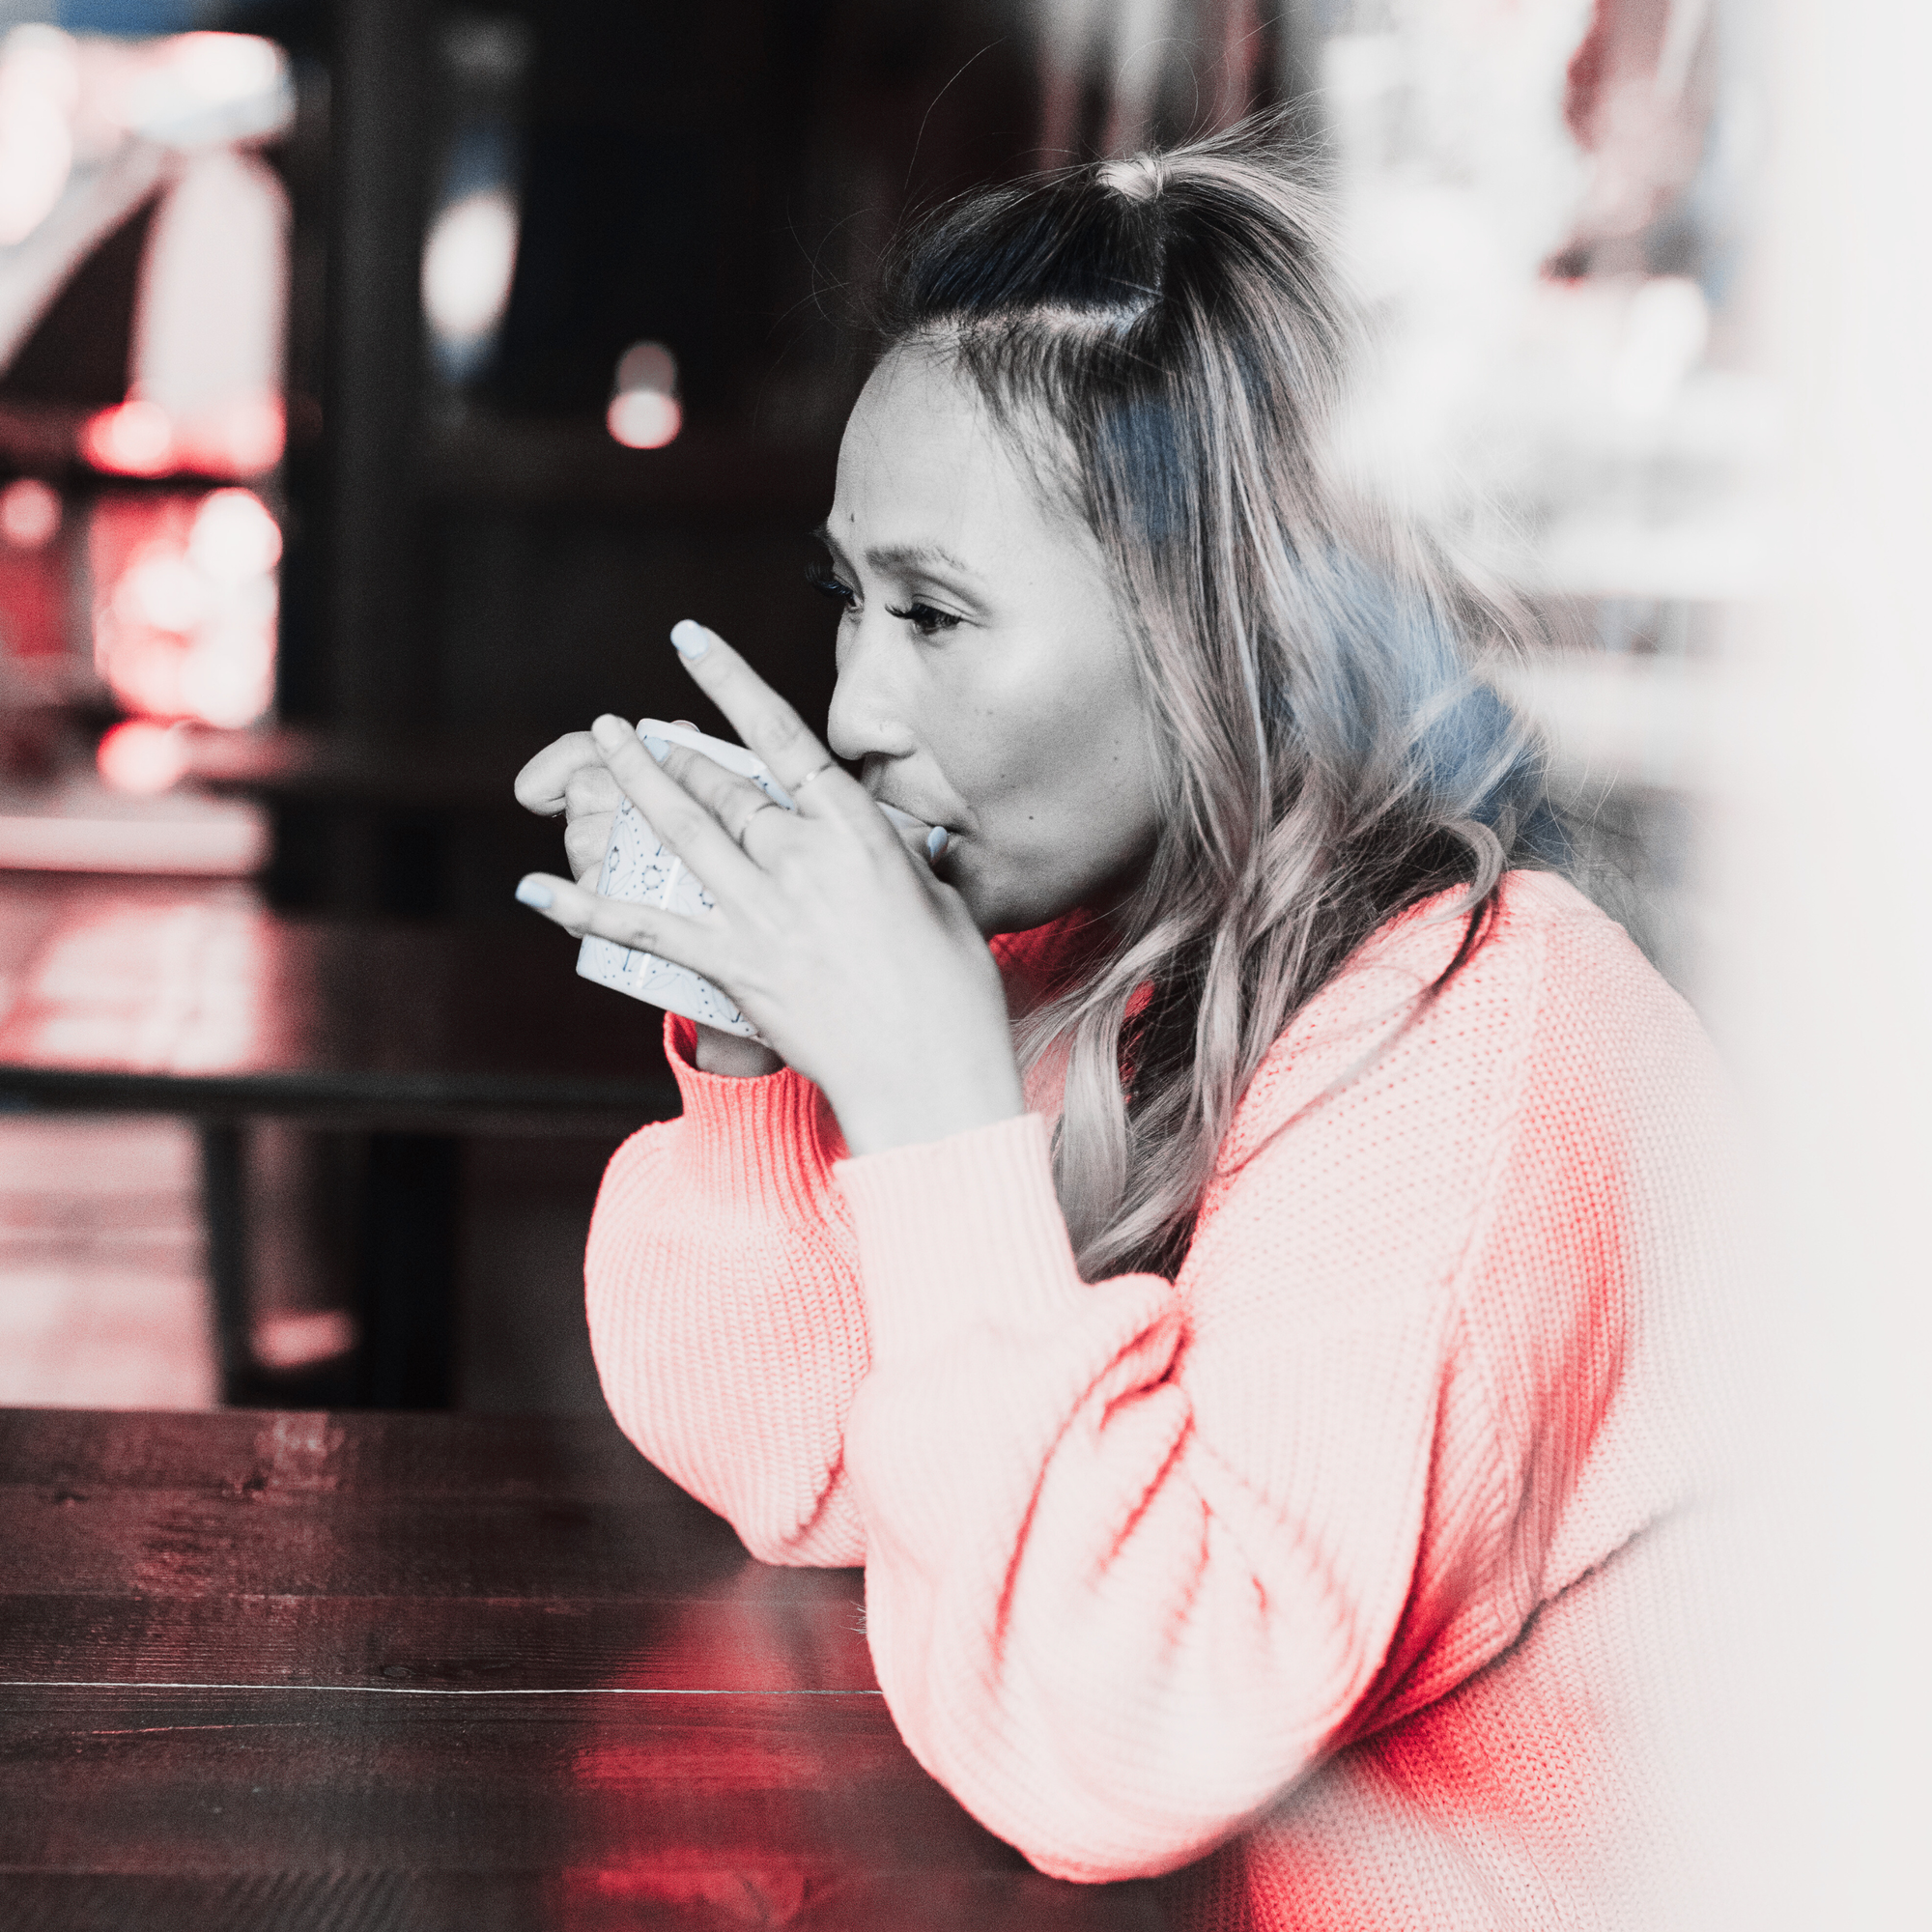 Photo of a woman sipping coffee from a mug.